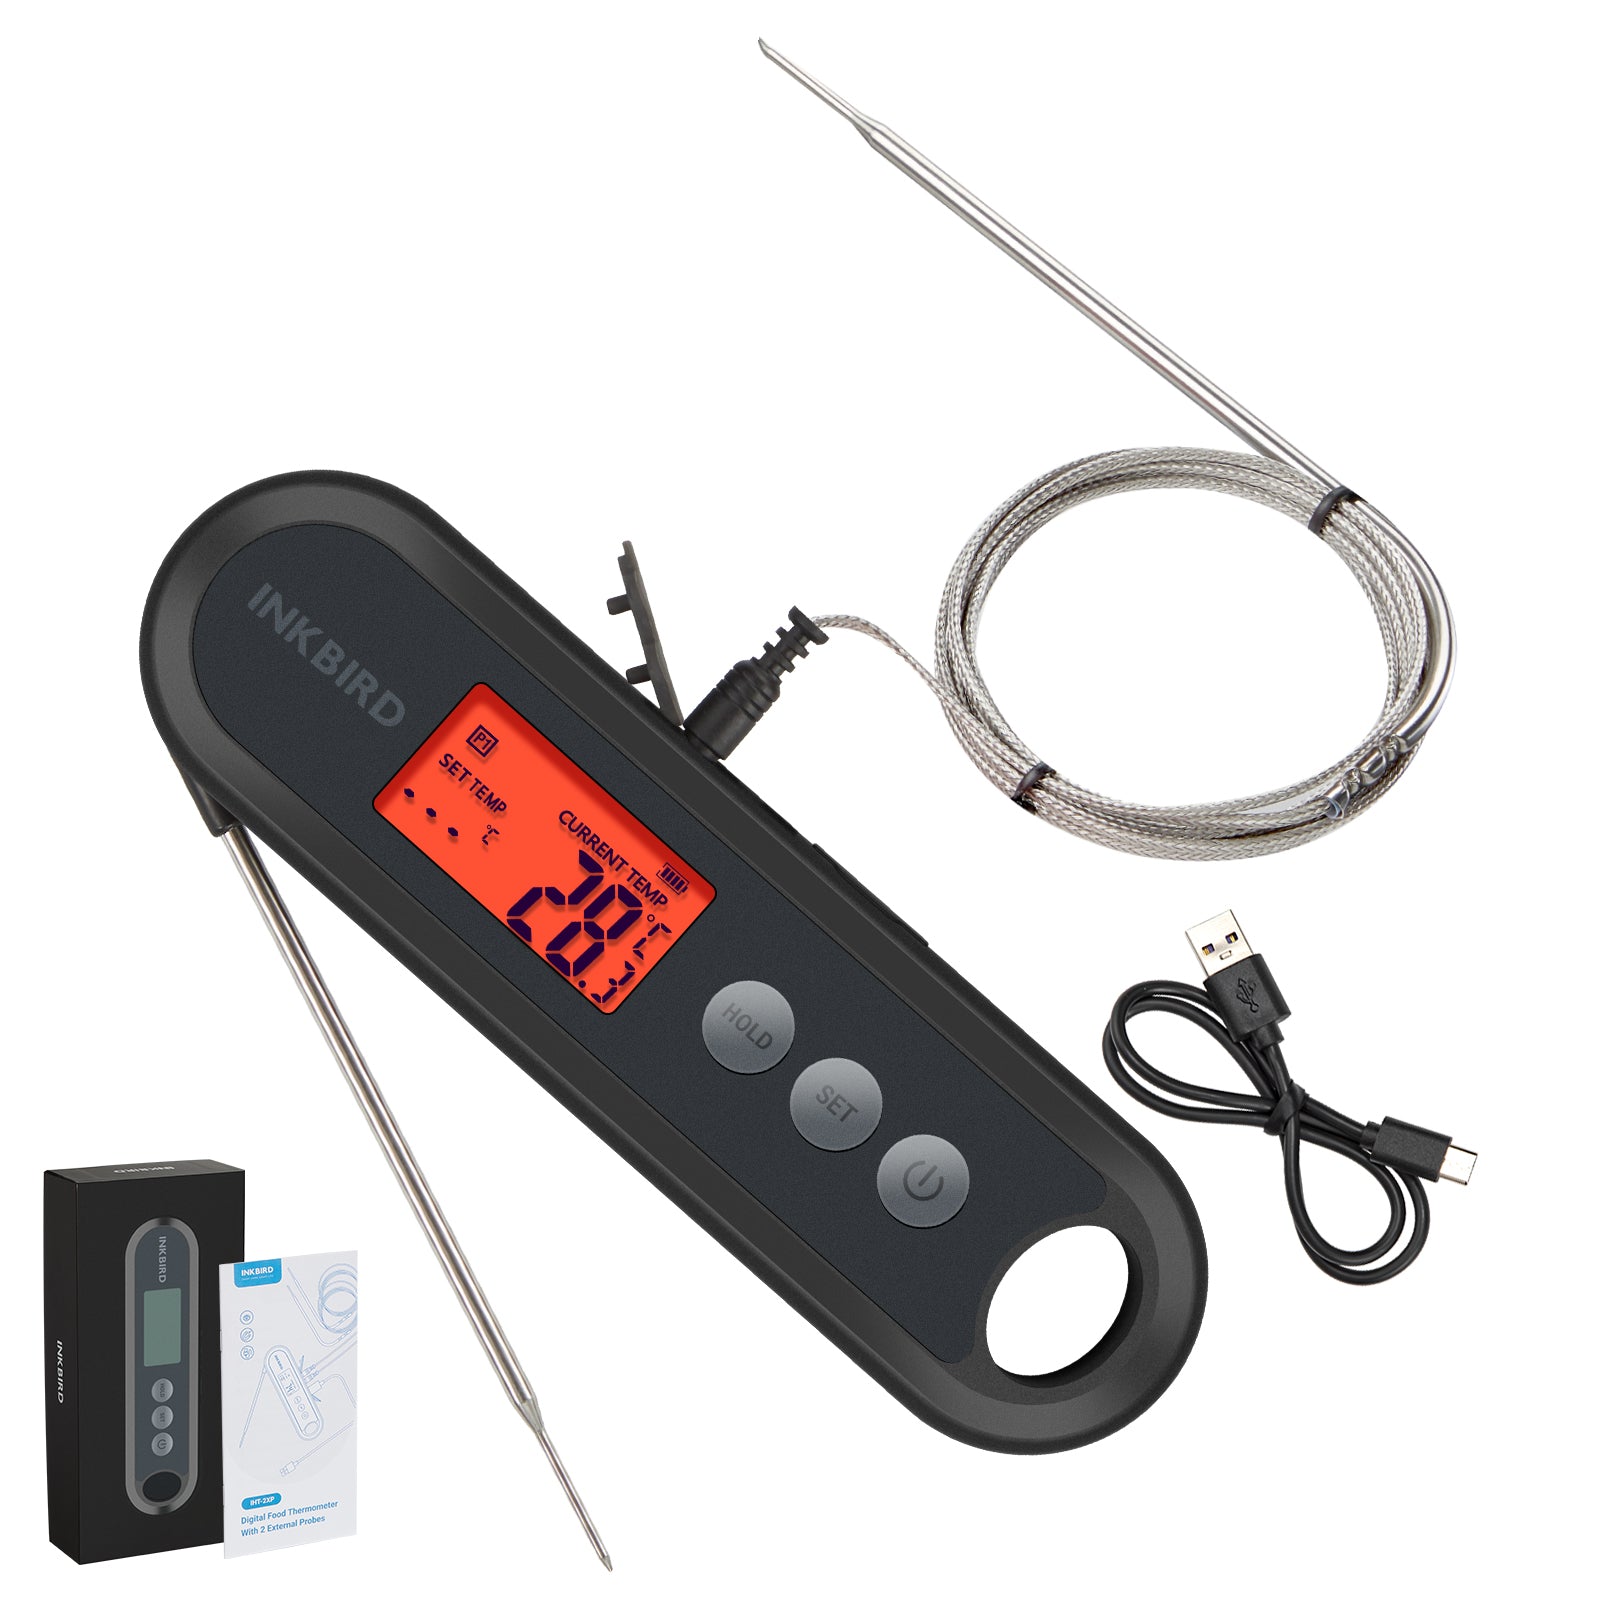 Tala Digital Fridge Thermometer With Battery